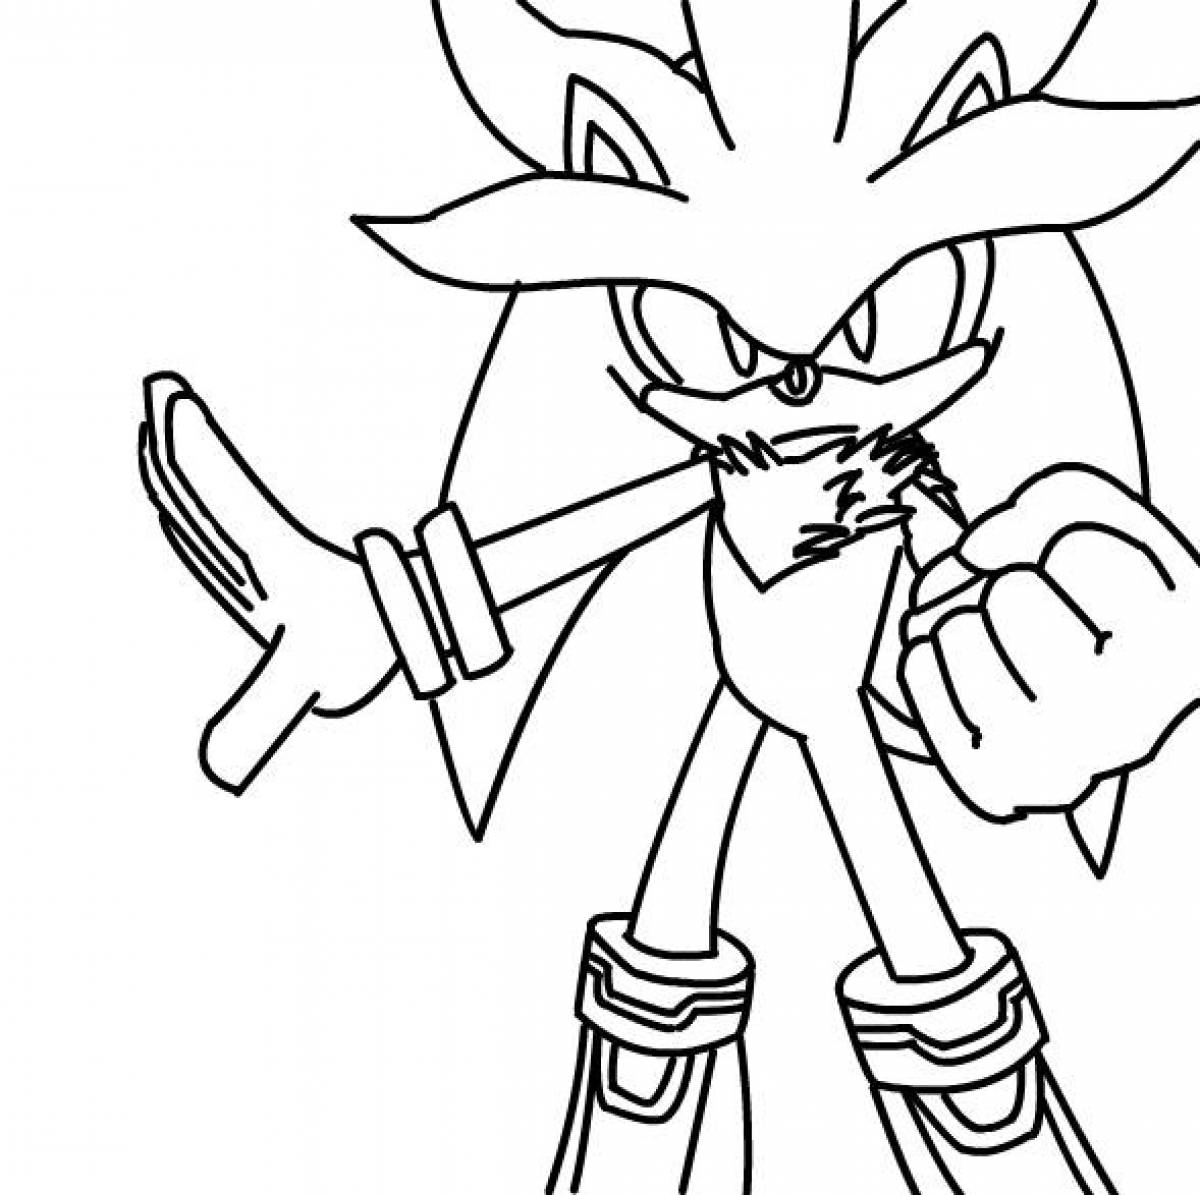 Exquisite sonic shadow coloring book